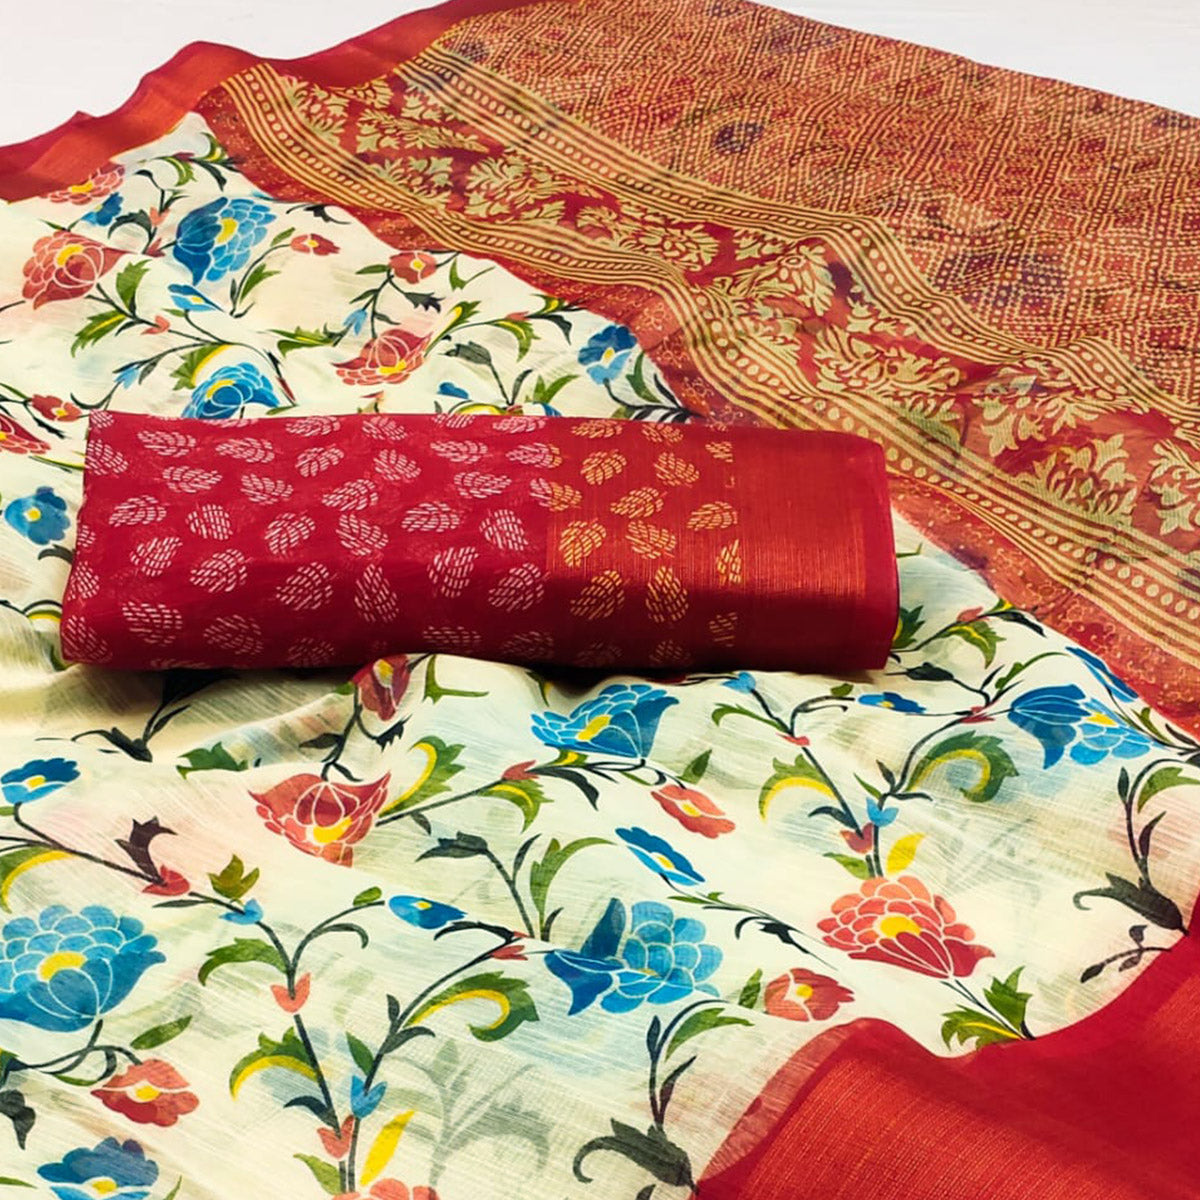 White & Red Floral Printed Cotton Blend Saree